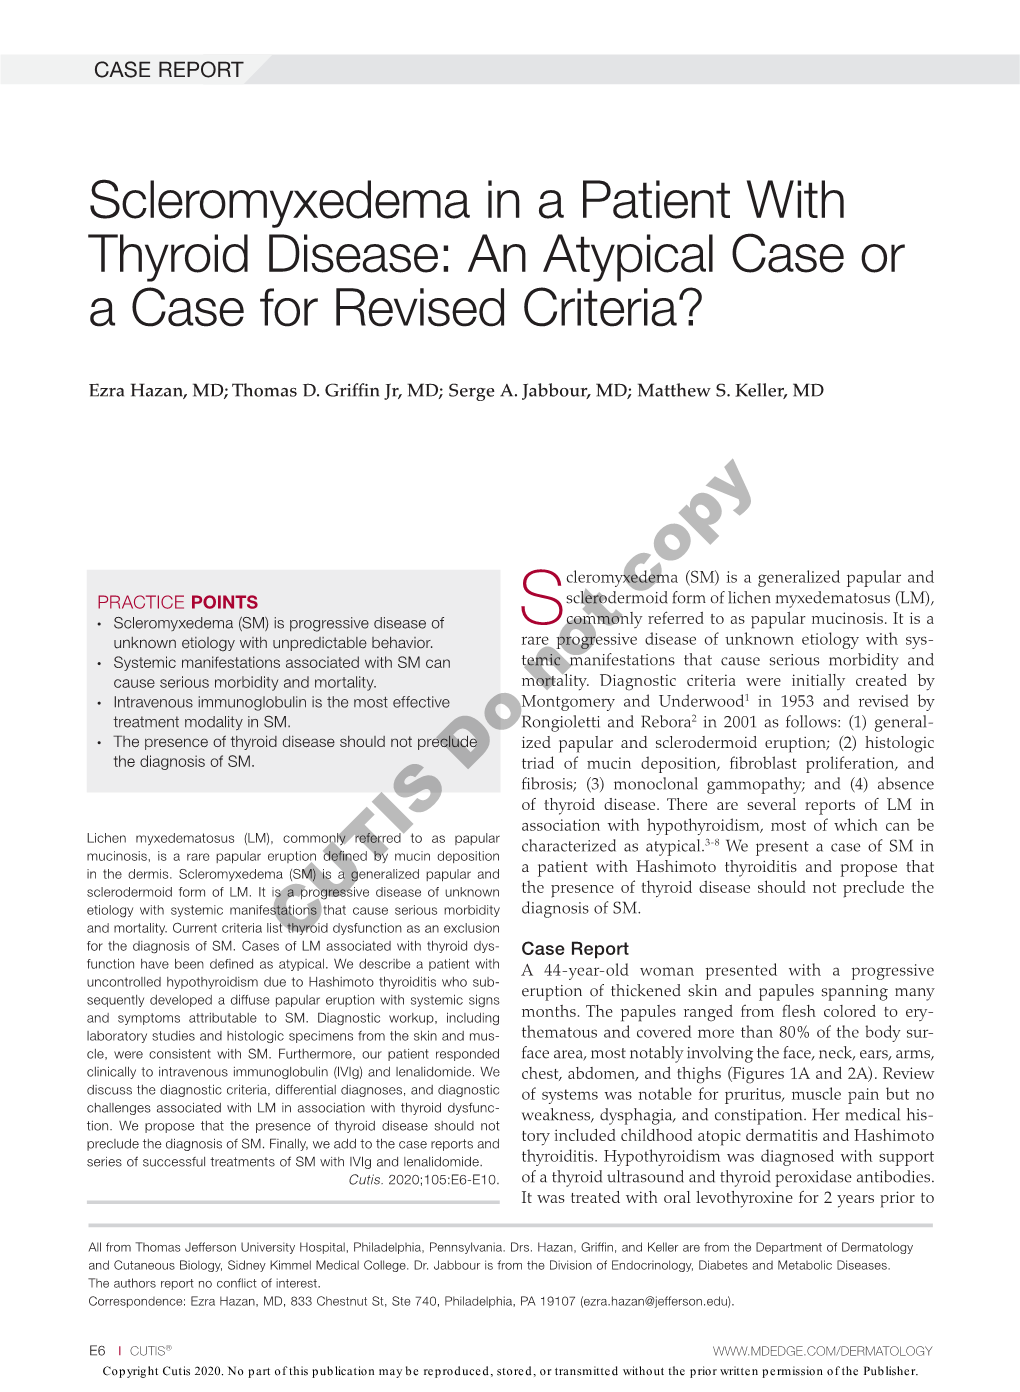 Scleromyxedema in a Patient with Thyroid Disease: an Atypical Case Or a Case for Revised Criteria?